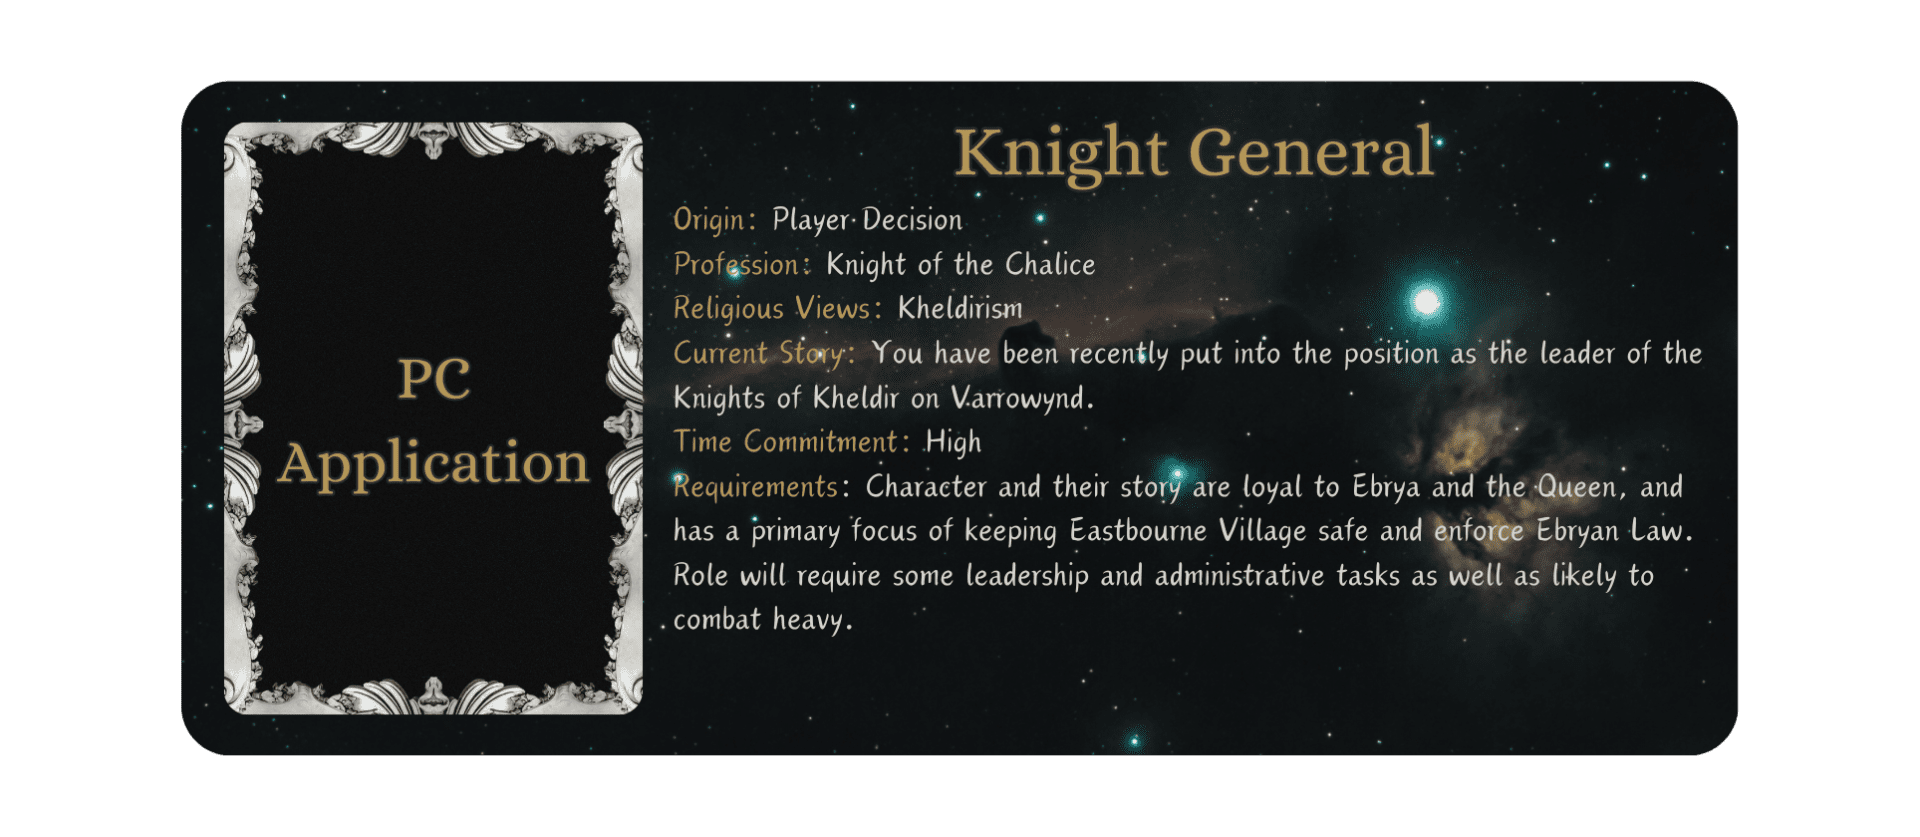 Click to select Knight General